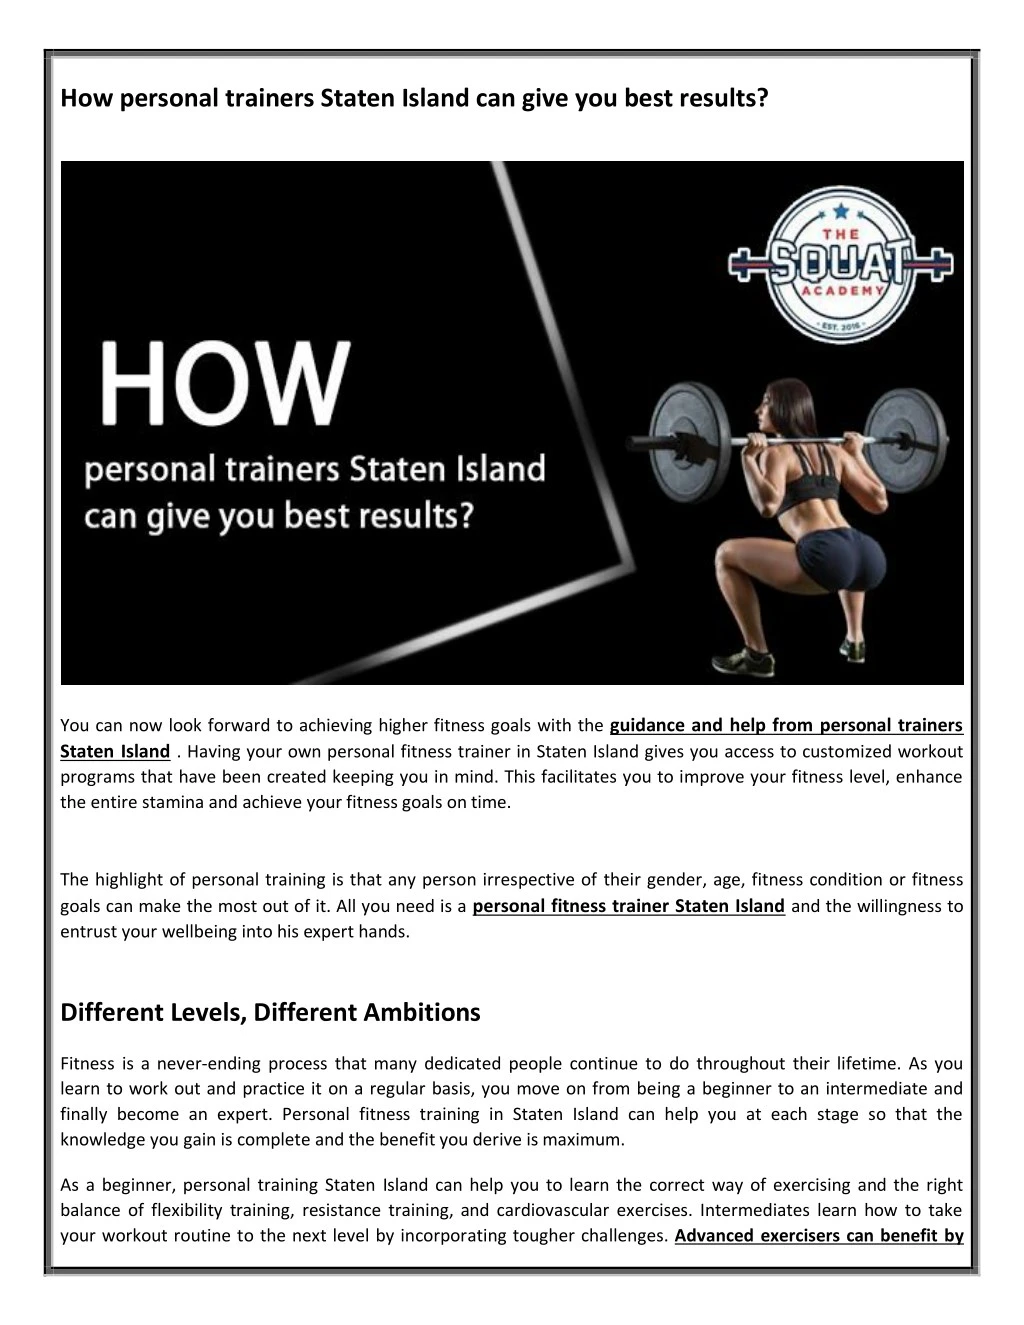 how personal trainers staten island can give